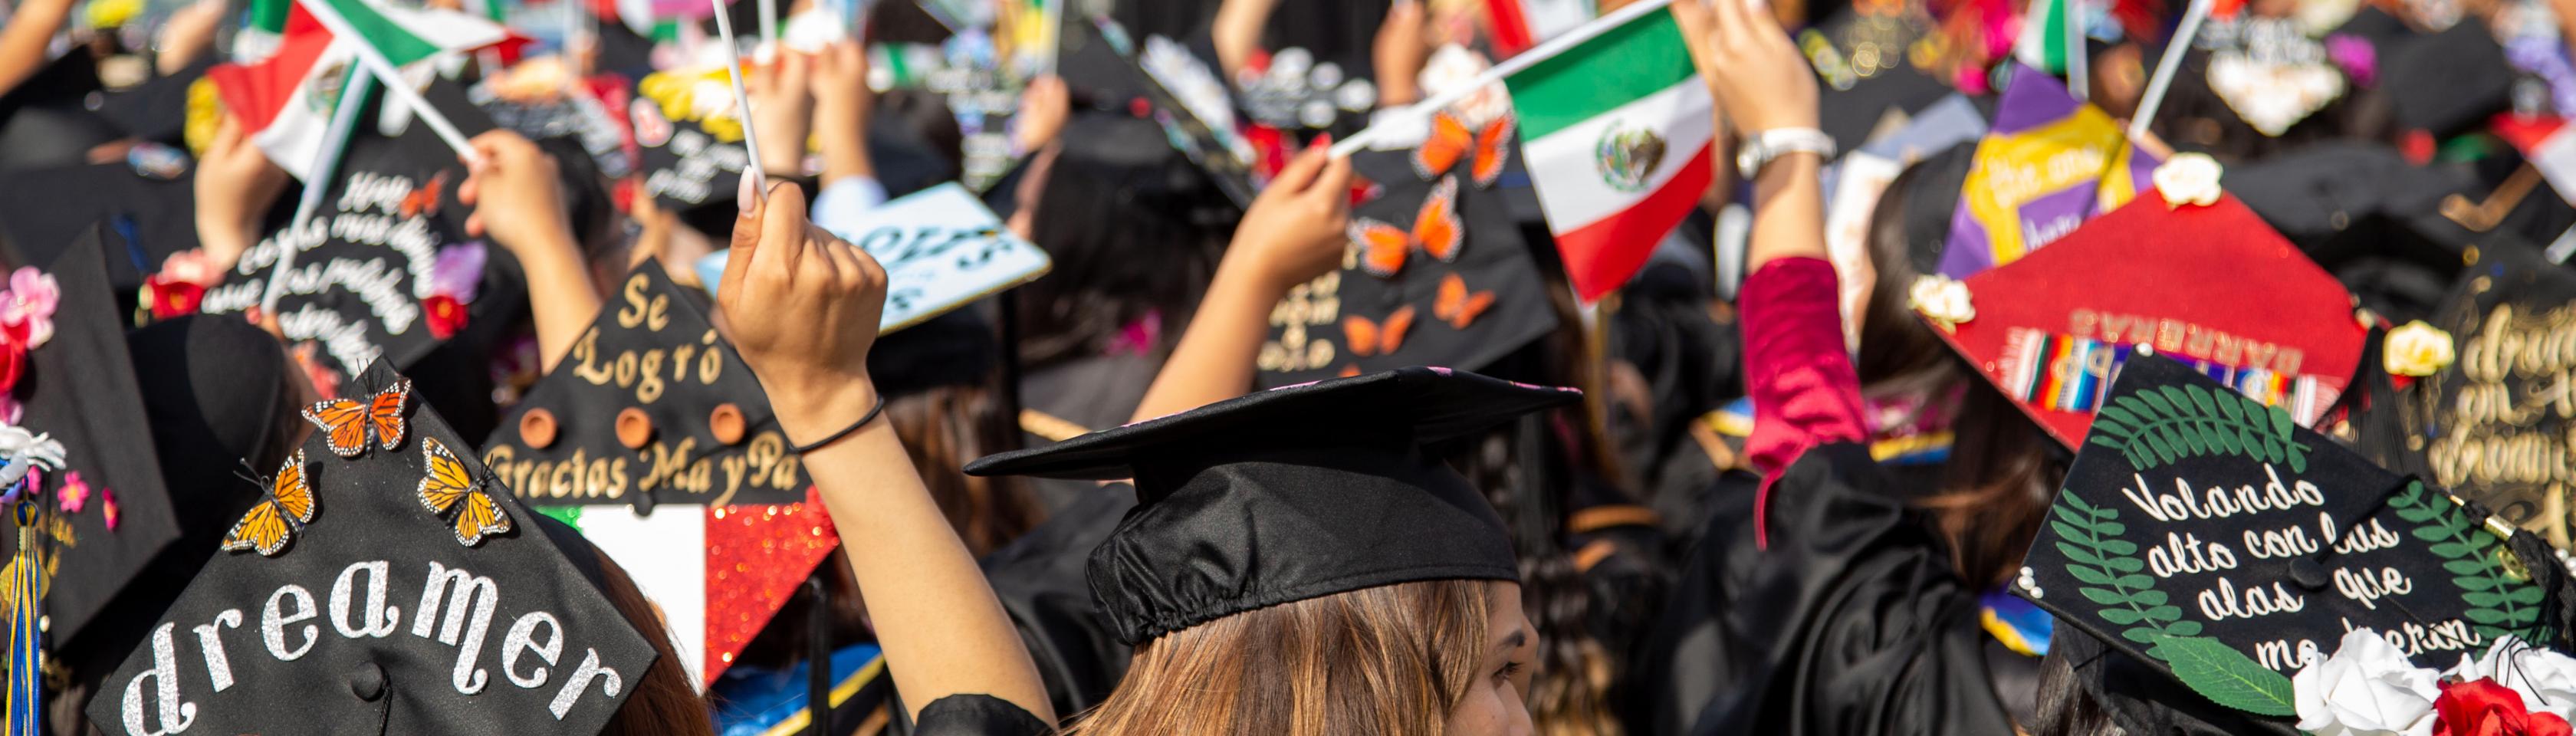 behind the head image of students dressed in decorative graduation garb waving flags of Mexico